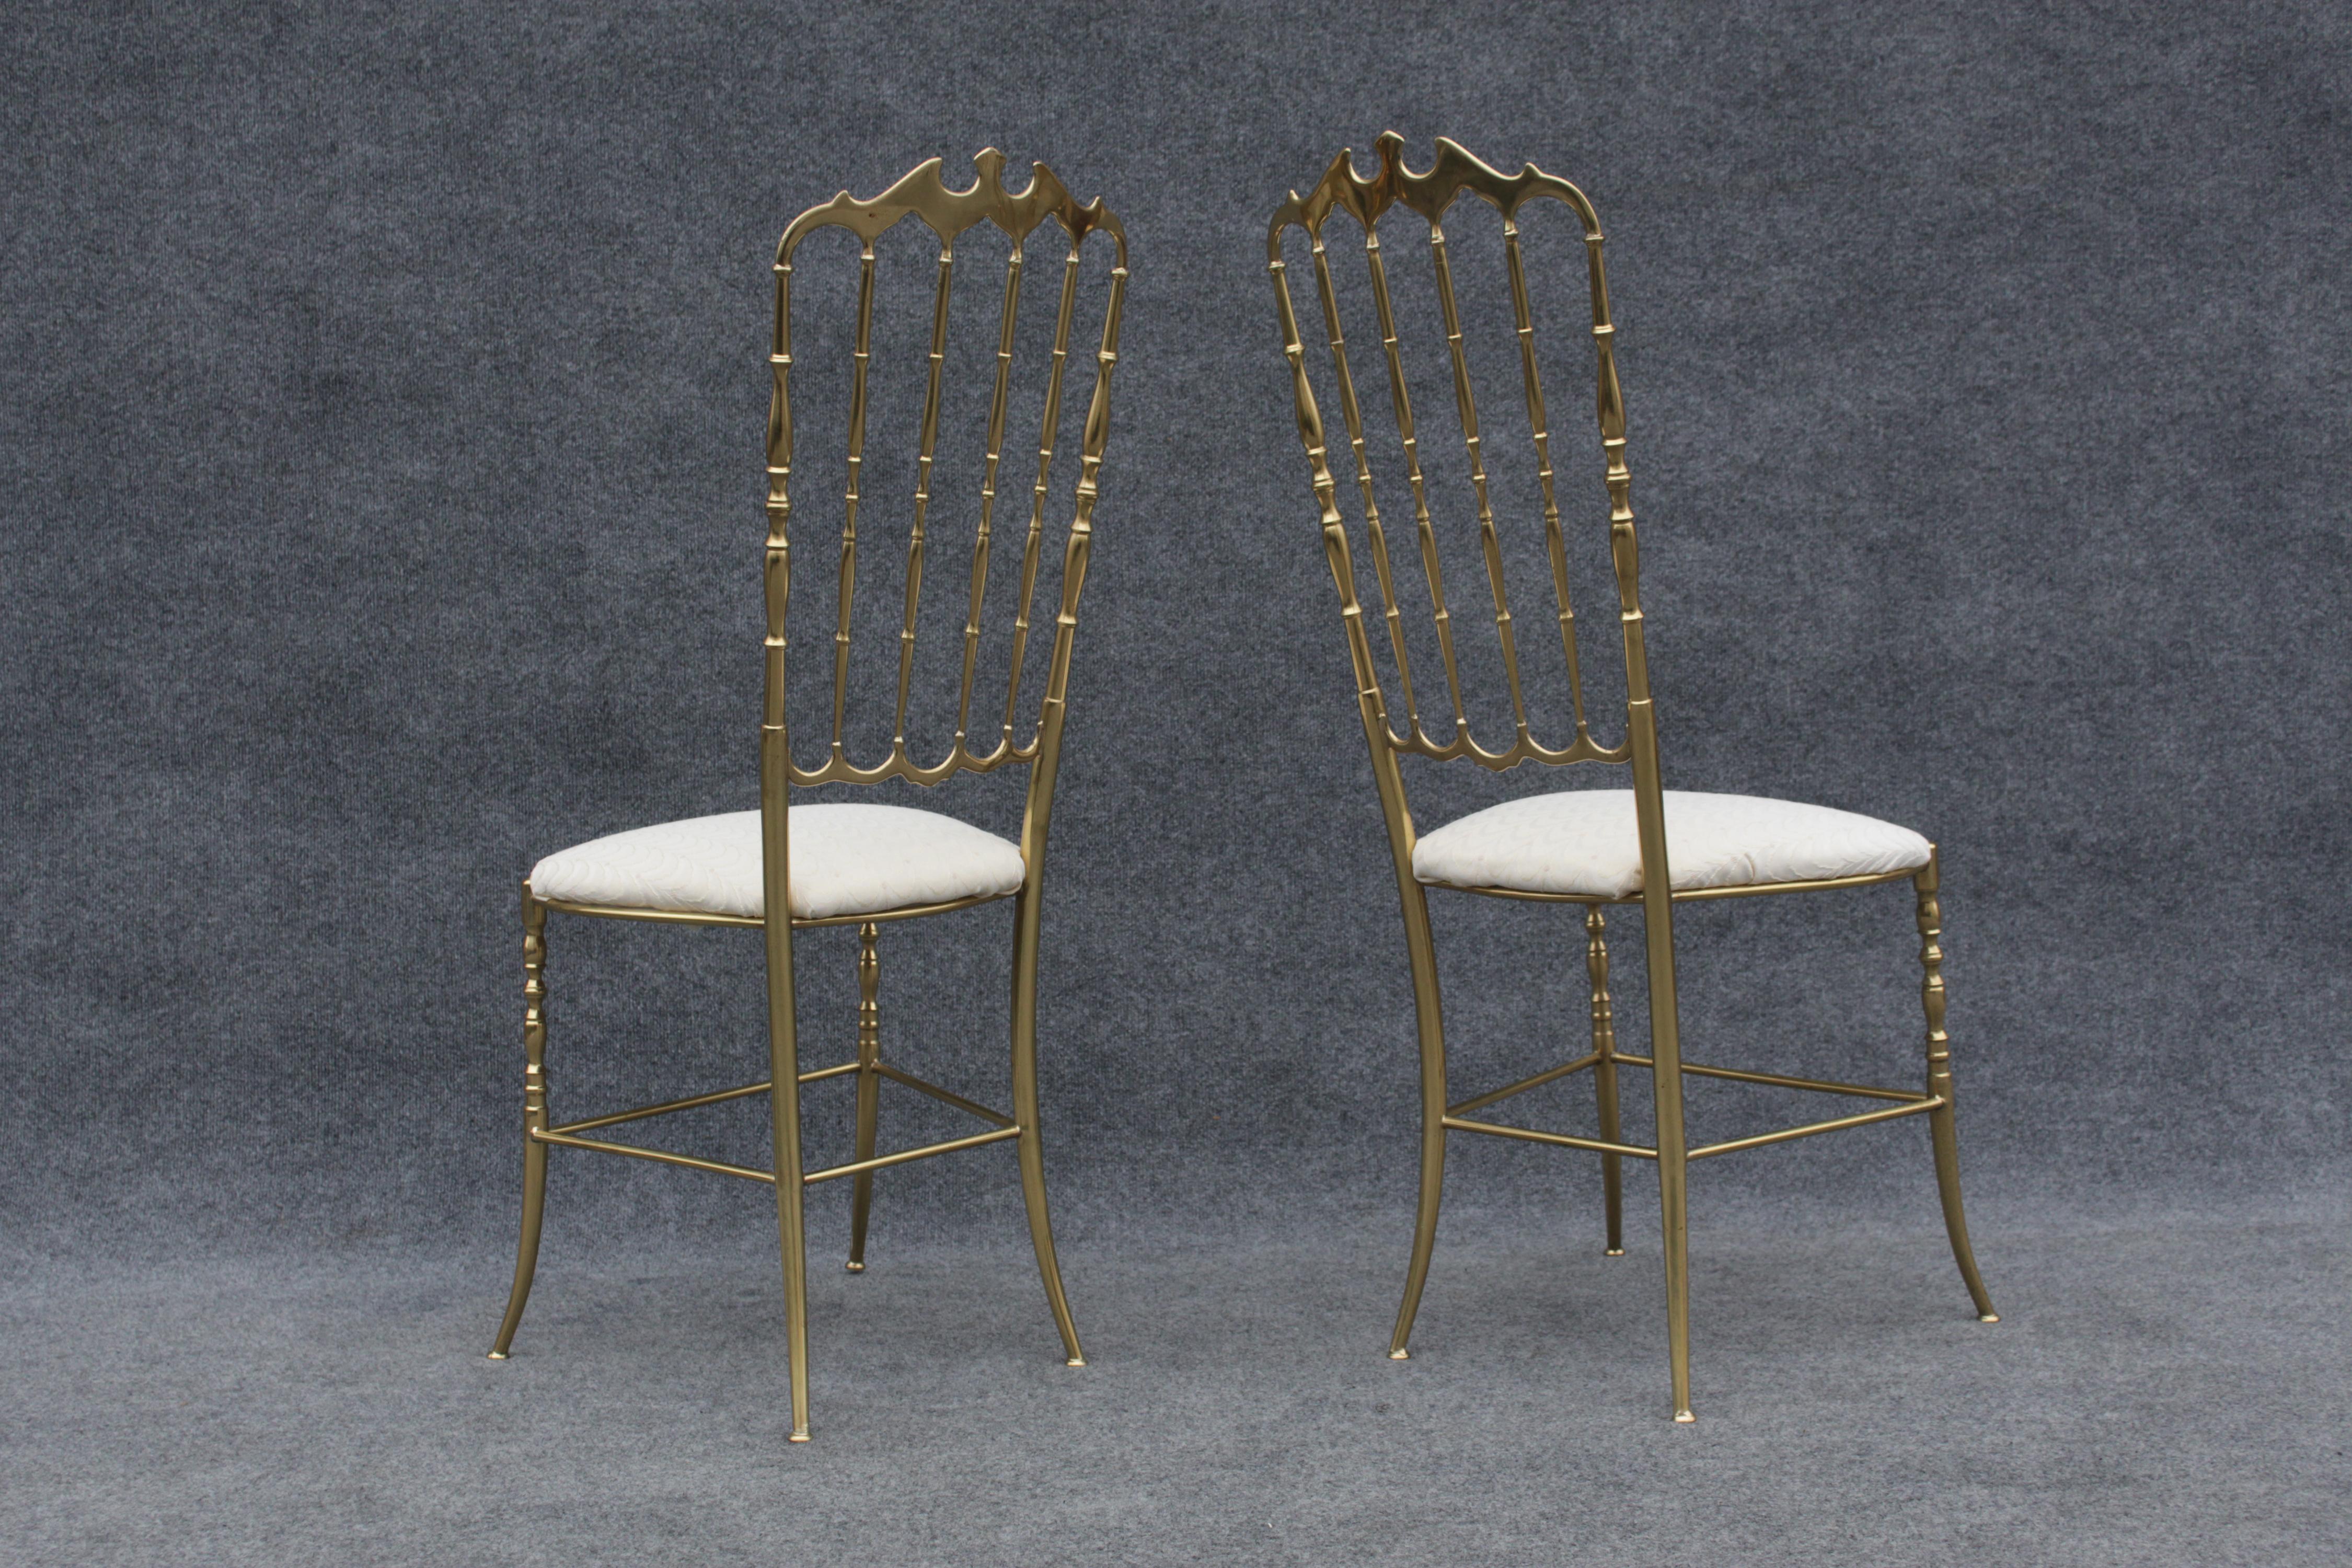 Pair of Solid Brass & White Upholstered Dining or Side Chairs by Chiavari Italy For Sale 5